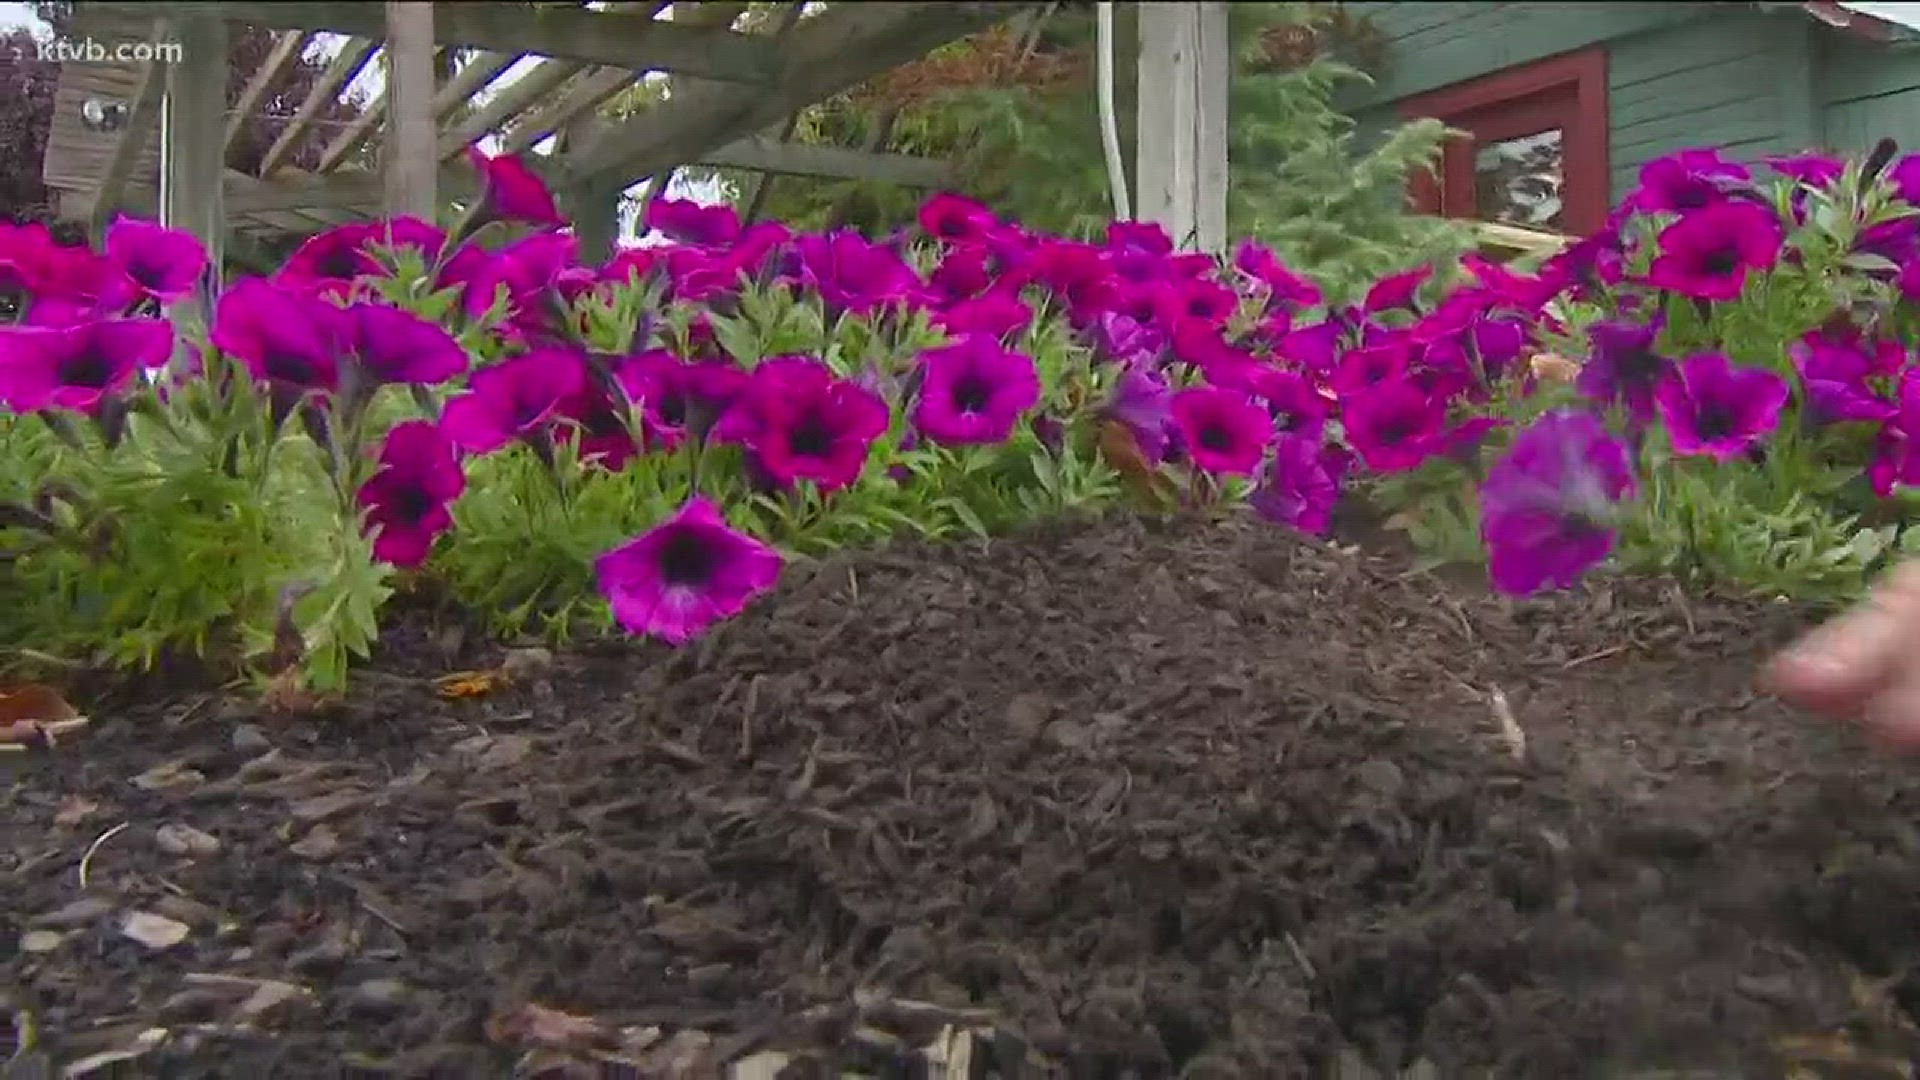 Now is a good time to add mulch to your garden.